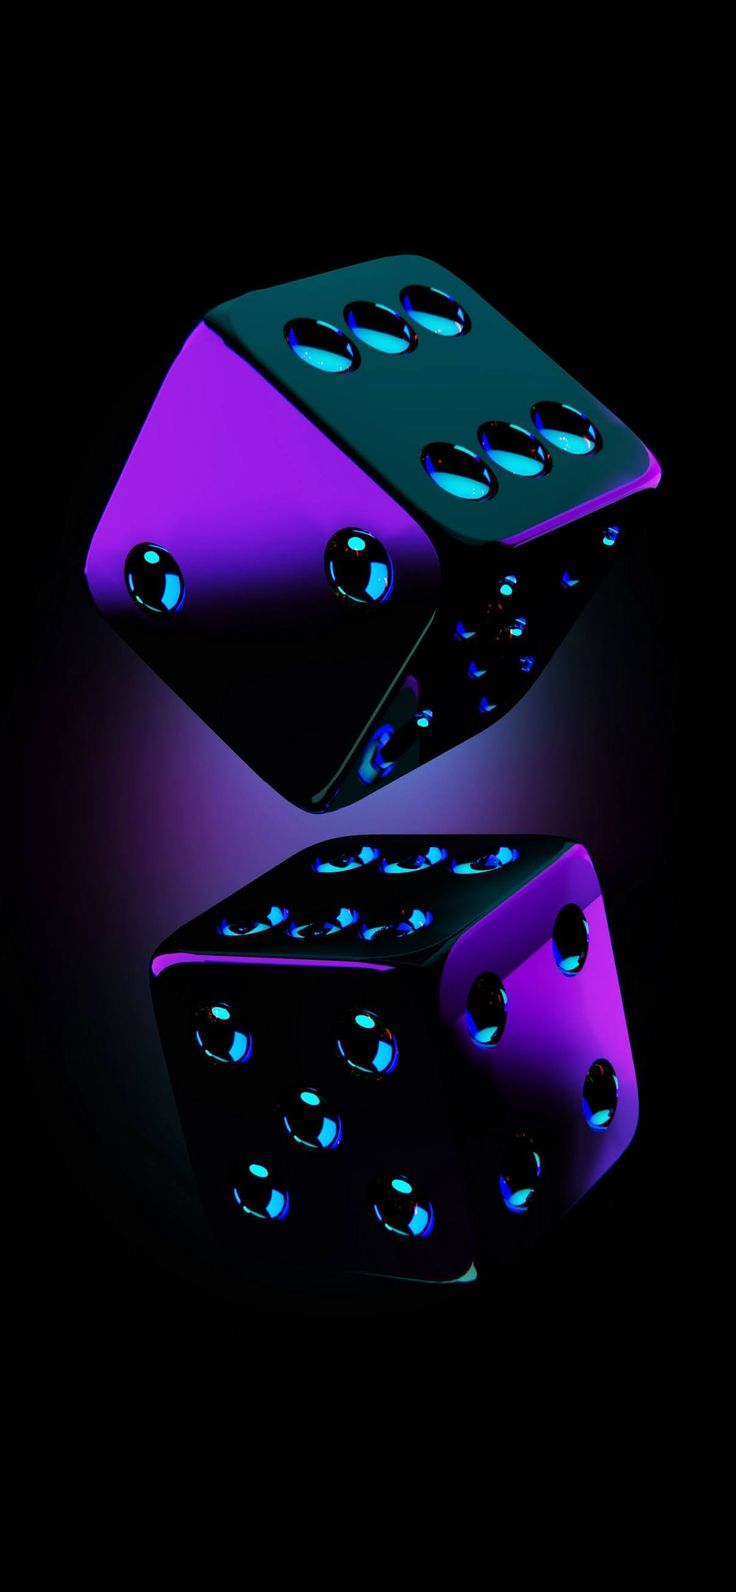 Dice ludo wallpaper. iPhone wallpaper hipster, Android wallpaper dark, HD phone wallpaper